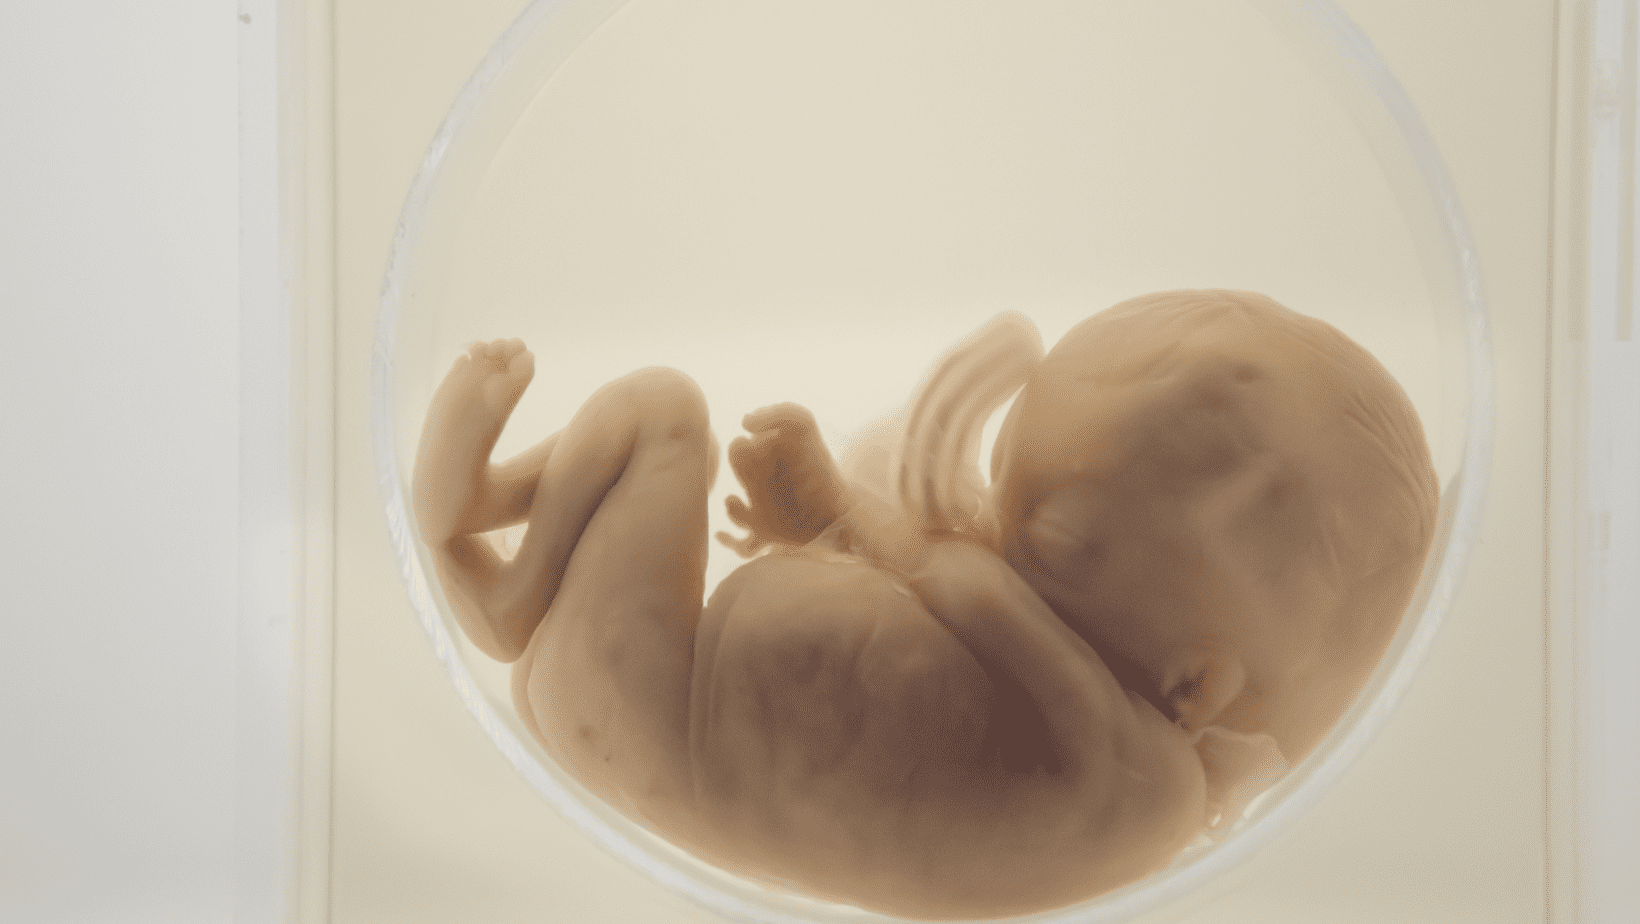 Could Human Post Implantation Embryo Models Revolutionize Our Understanding of Early Development?